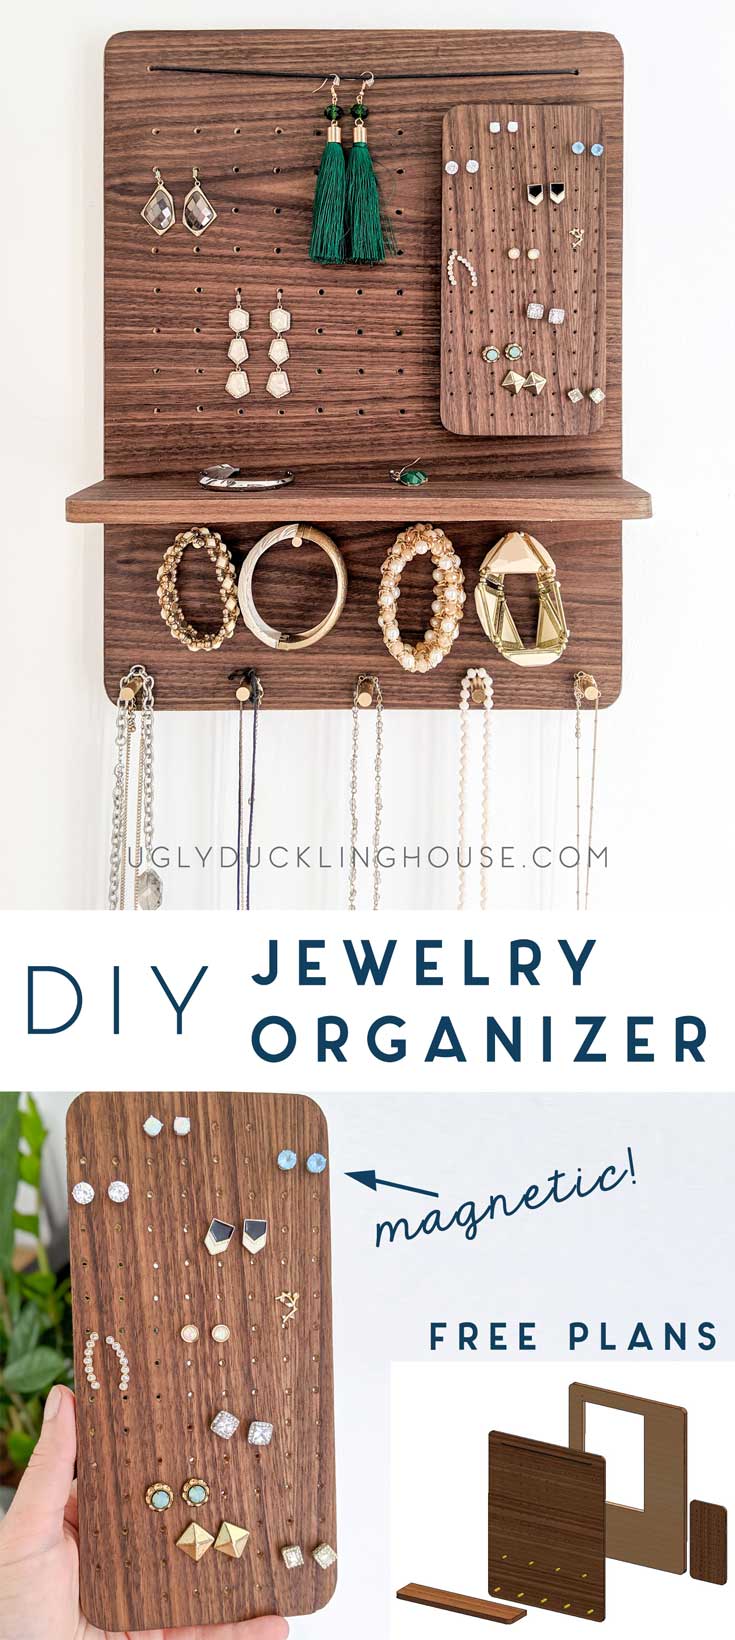 diy jewelry organizer with free plans by Ugly Duckling House